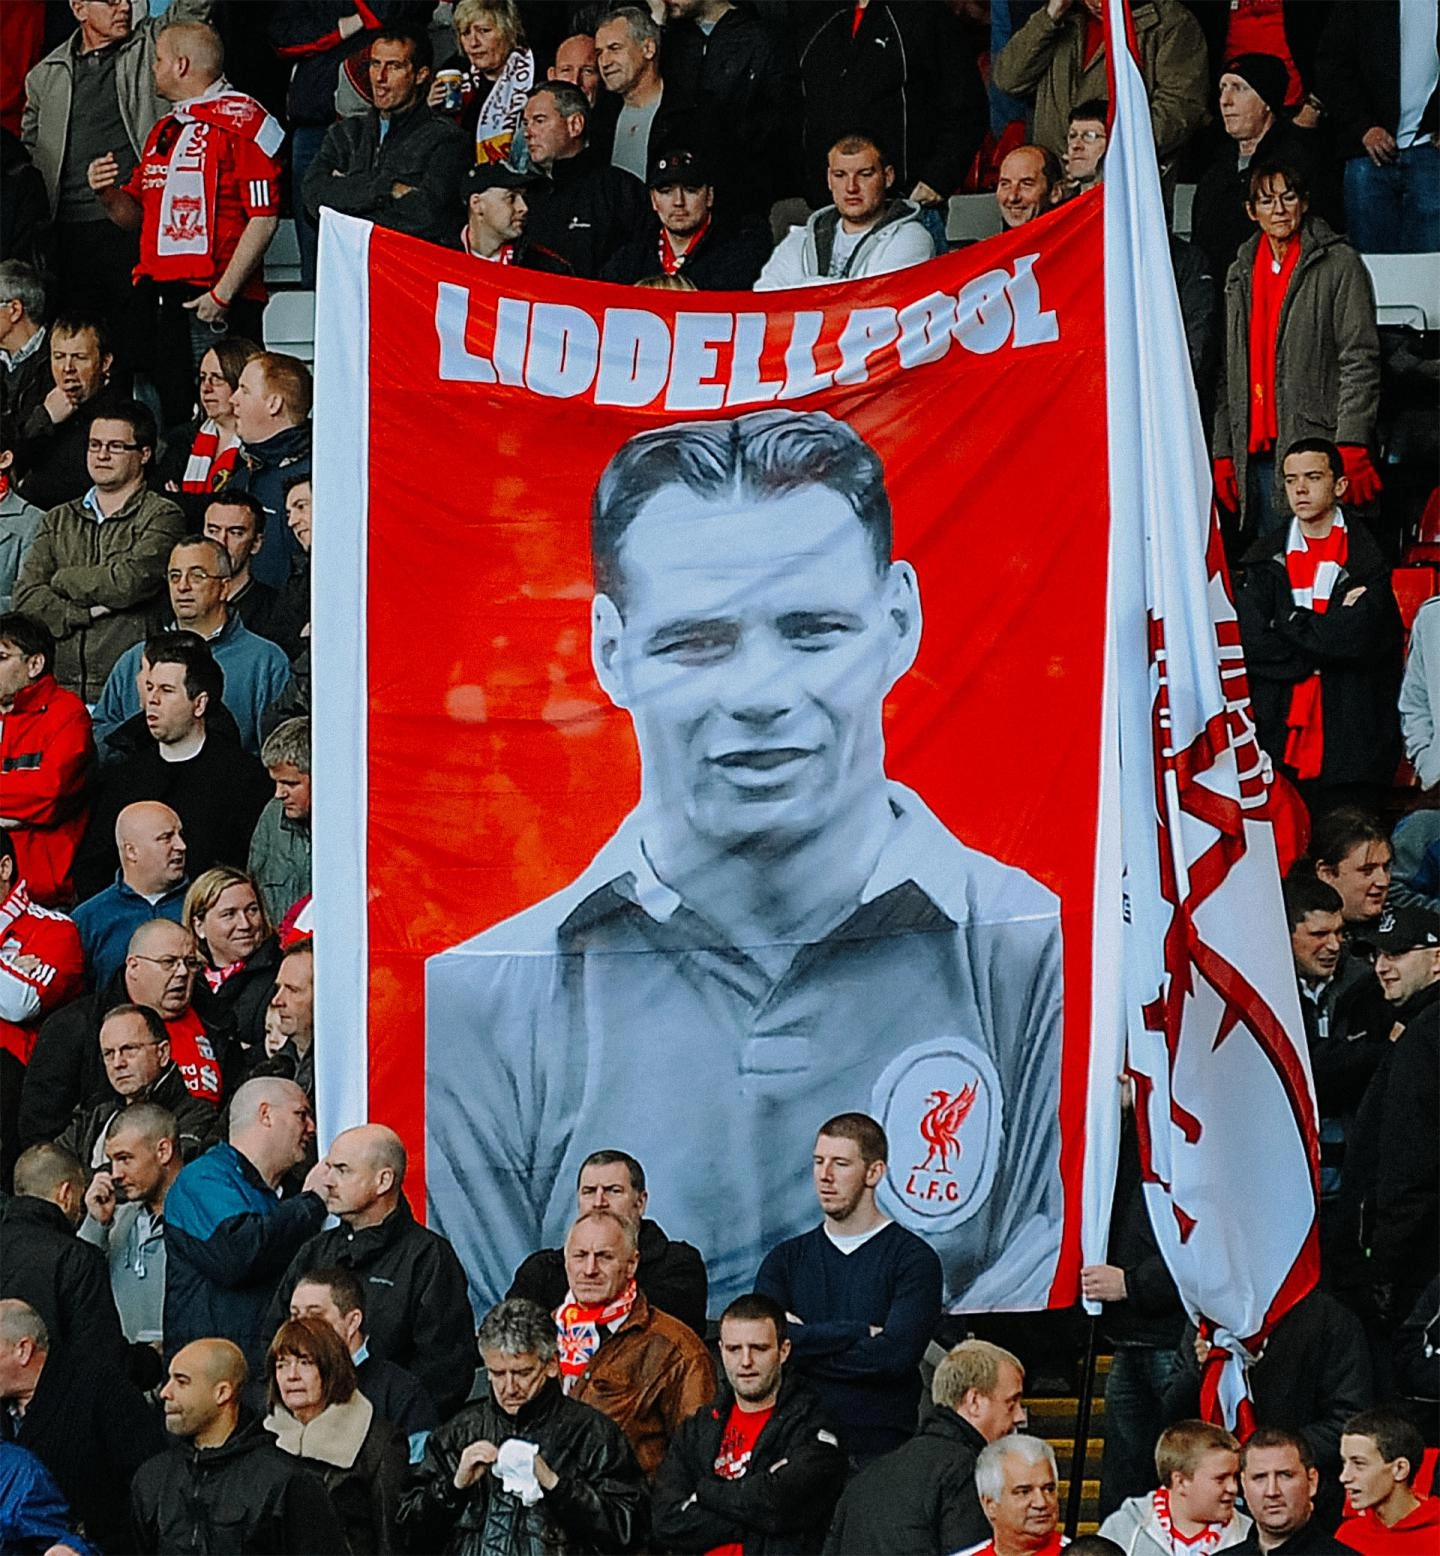 A banner in Liddell's honour at Anfield